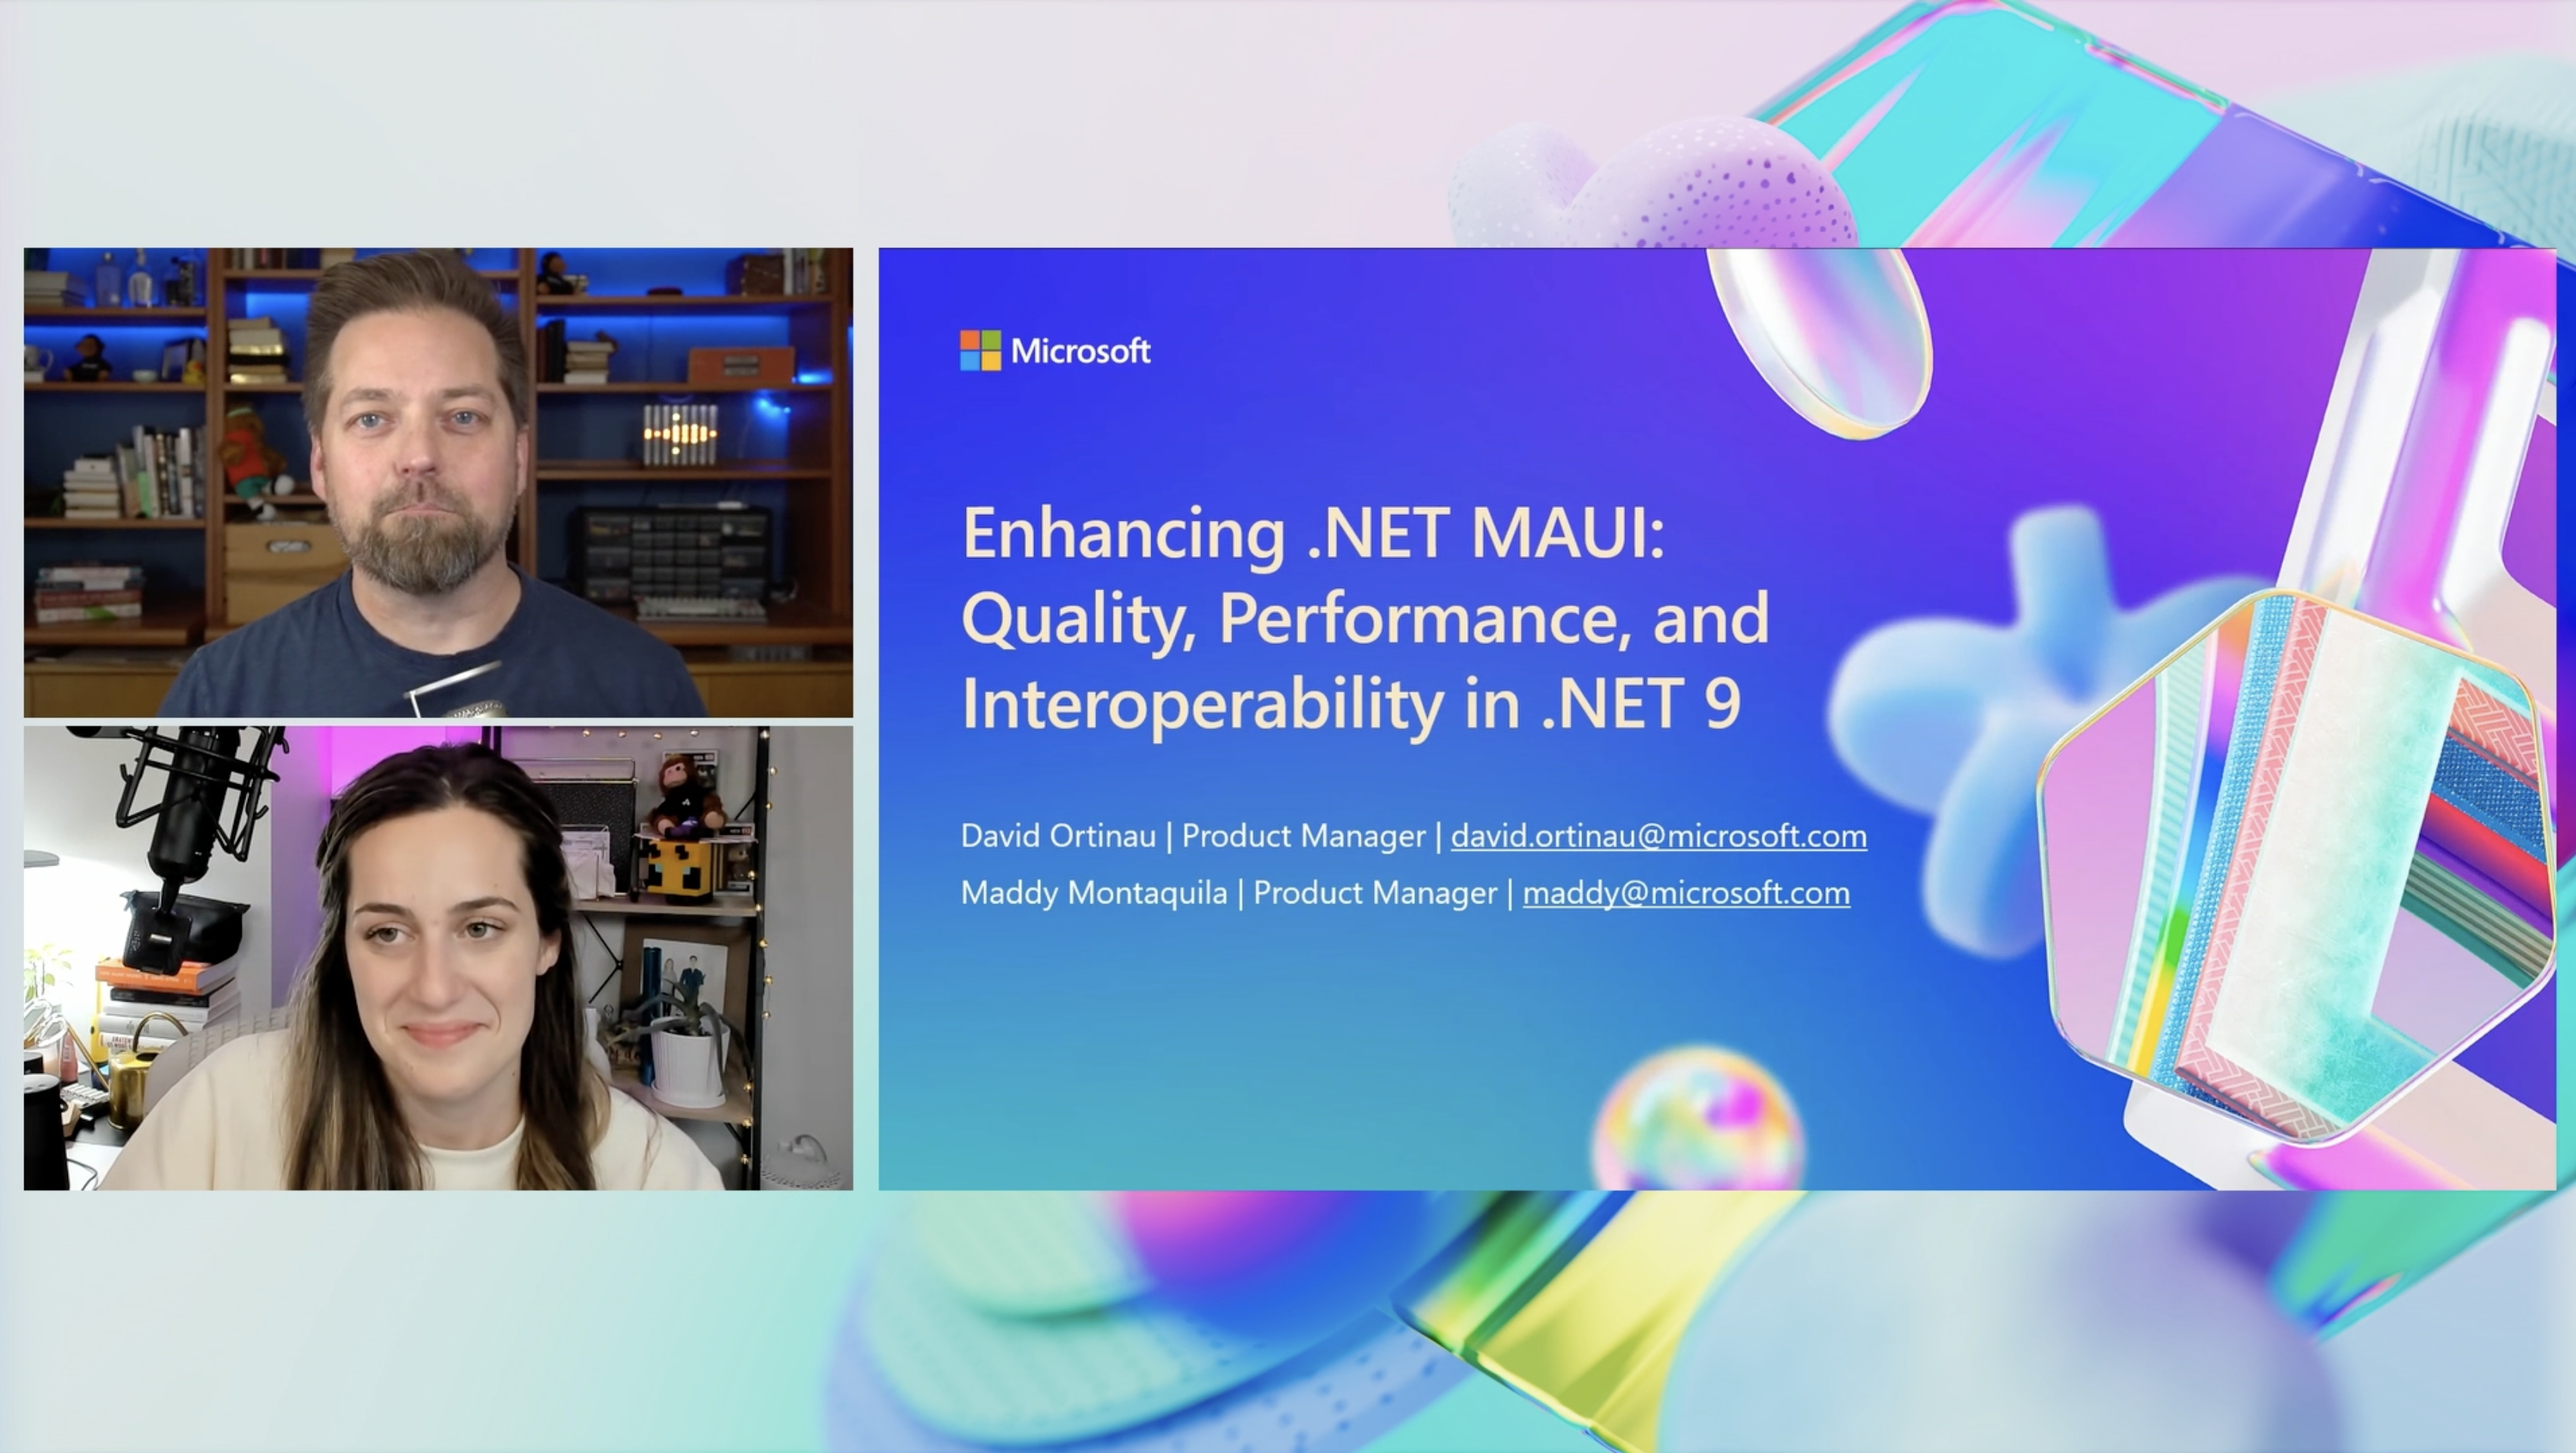 Enhancing .NET MAUI: Quality, performance and interoperability in .NET 9 - David Ortinau and Maddy Montaquila